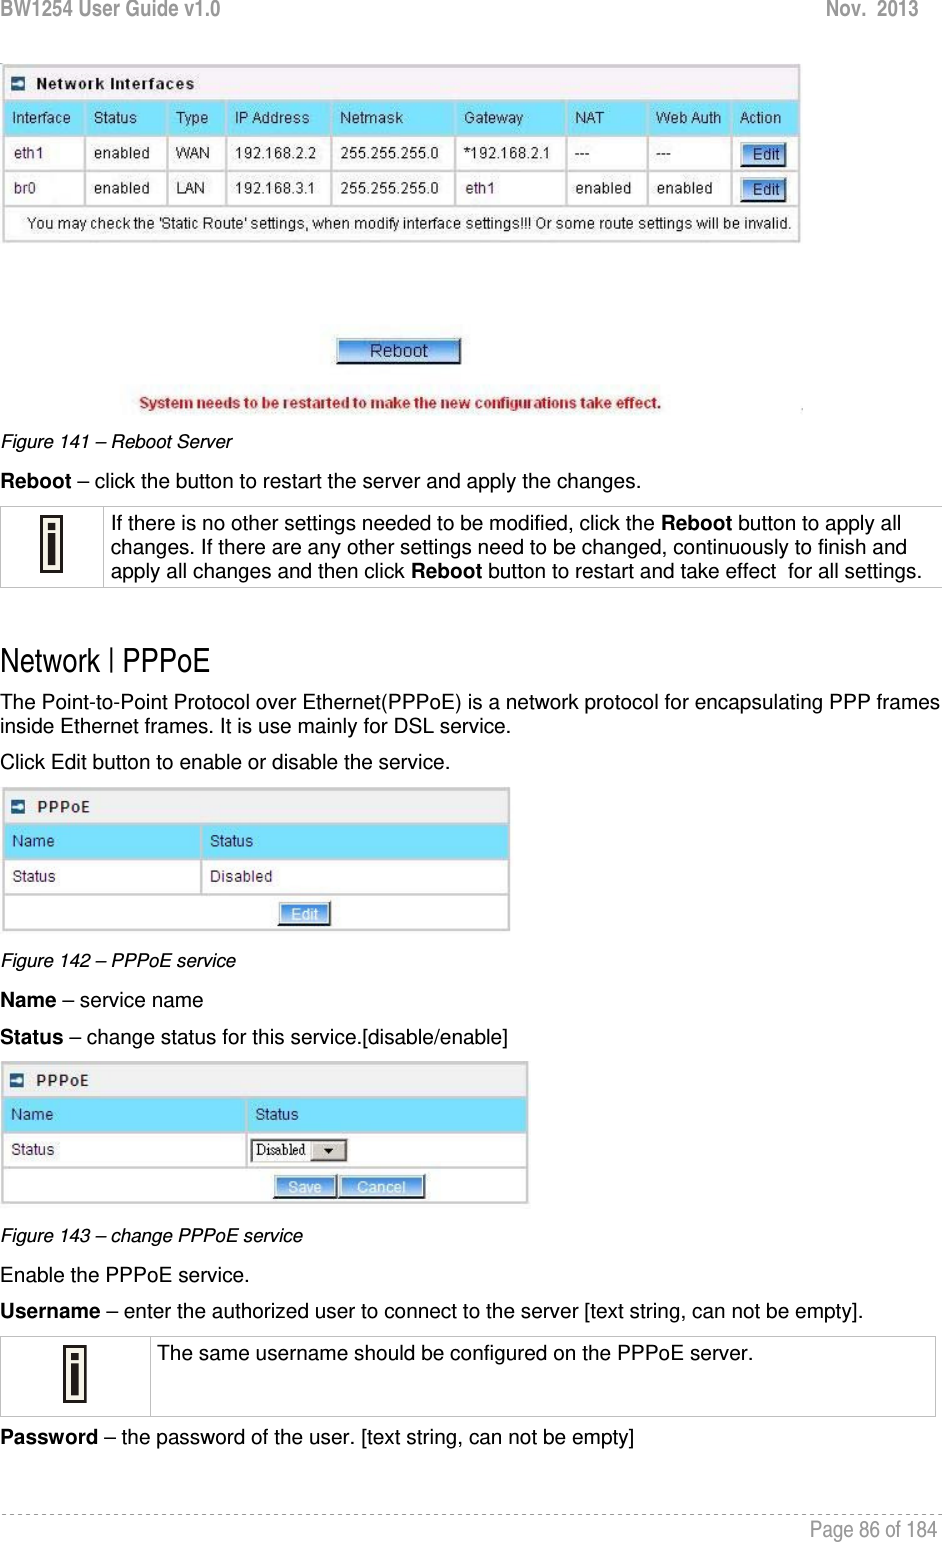 BW1254 User Guide v1.0  Nov.  2013     Page 86 of 184    Figure 141 – Reboot Server Reboot – click the button to restart the server and apply the changes.  If there is no other settings needed to be modified, click the Reboot button to apply all changes. If there are any other settings need to be changed, continuously to finish and apply all changes and then click Reboot button to restart and take effect  for all settings.  Network | PPPoE The Point-to-Point Protocol over Ethernet(PPPoE) is a network protocol for encapsulating PPP frames inside Ethernet frames. It is use mainly for DSL service. Click Edit button to enable or disable the service.  Figure 142 – PPPoE service Name – service name Status – change status for this service.[disable/enable]  Figure 143 – change PPPoE service Enable the PPPoE service. Username – enter the authorized user to connect to the server [text string, can not be empty].  The same username should be configured on the PPPoE server. Password – the password of the user. [text string, can not be empty]  